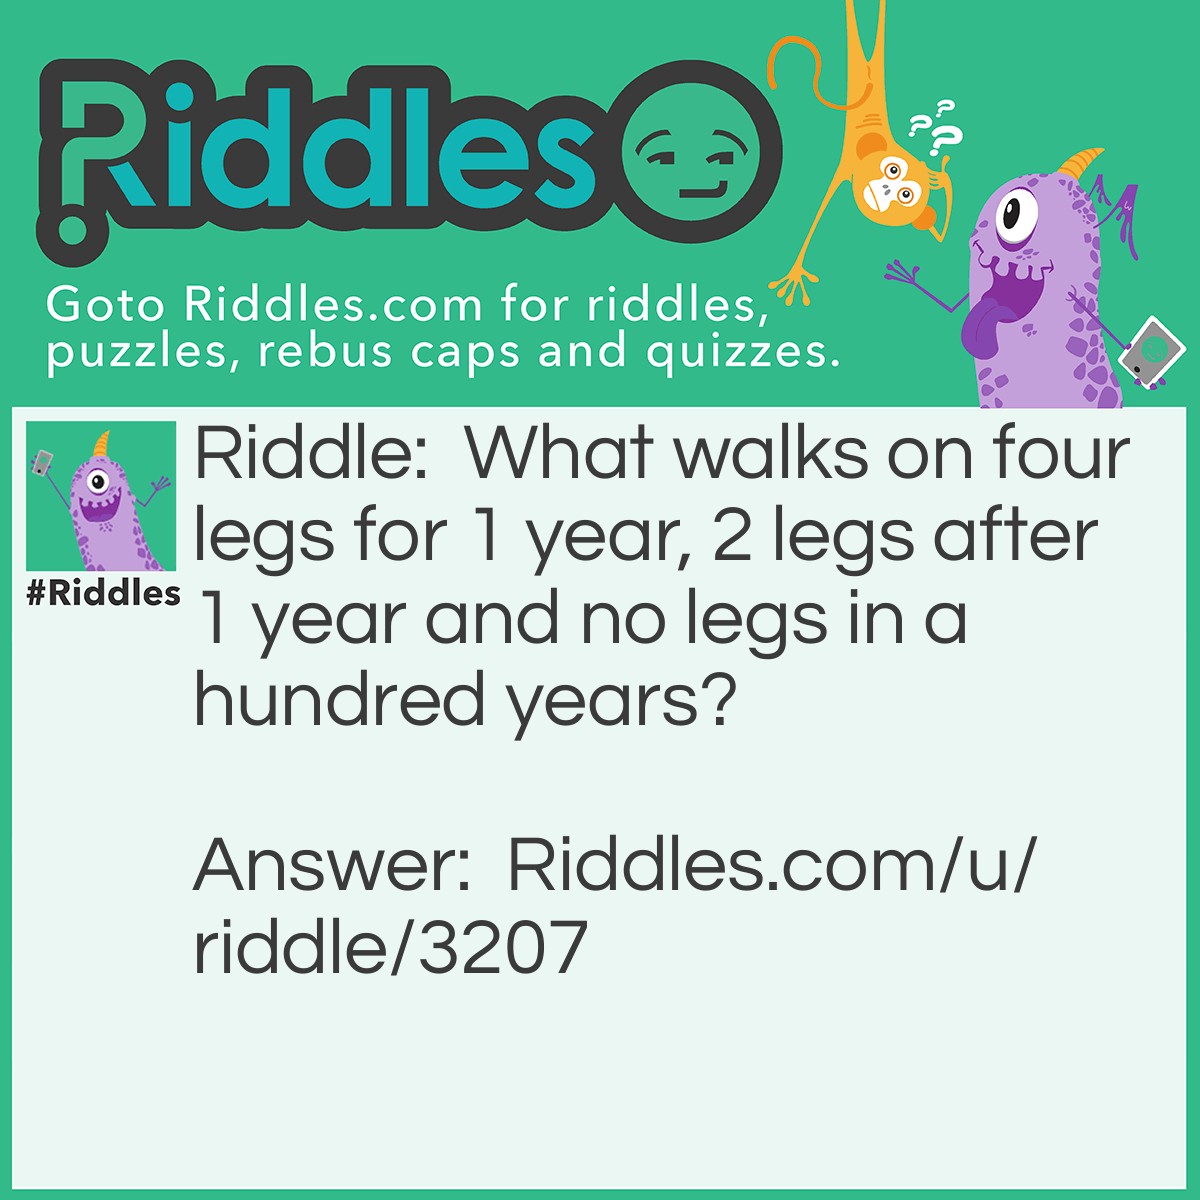 Riddle: What walks on four legs for 1 year, 2 legs after 1 year and no legs in a hundred years? Answer: A human.